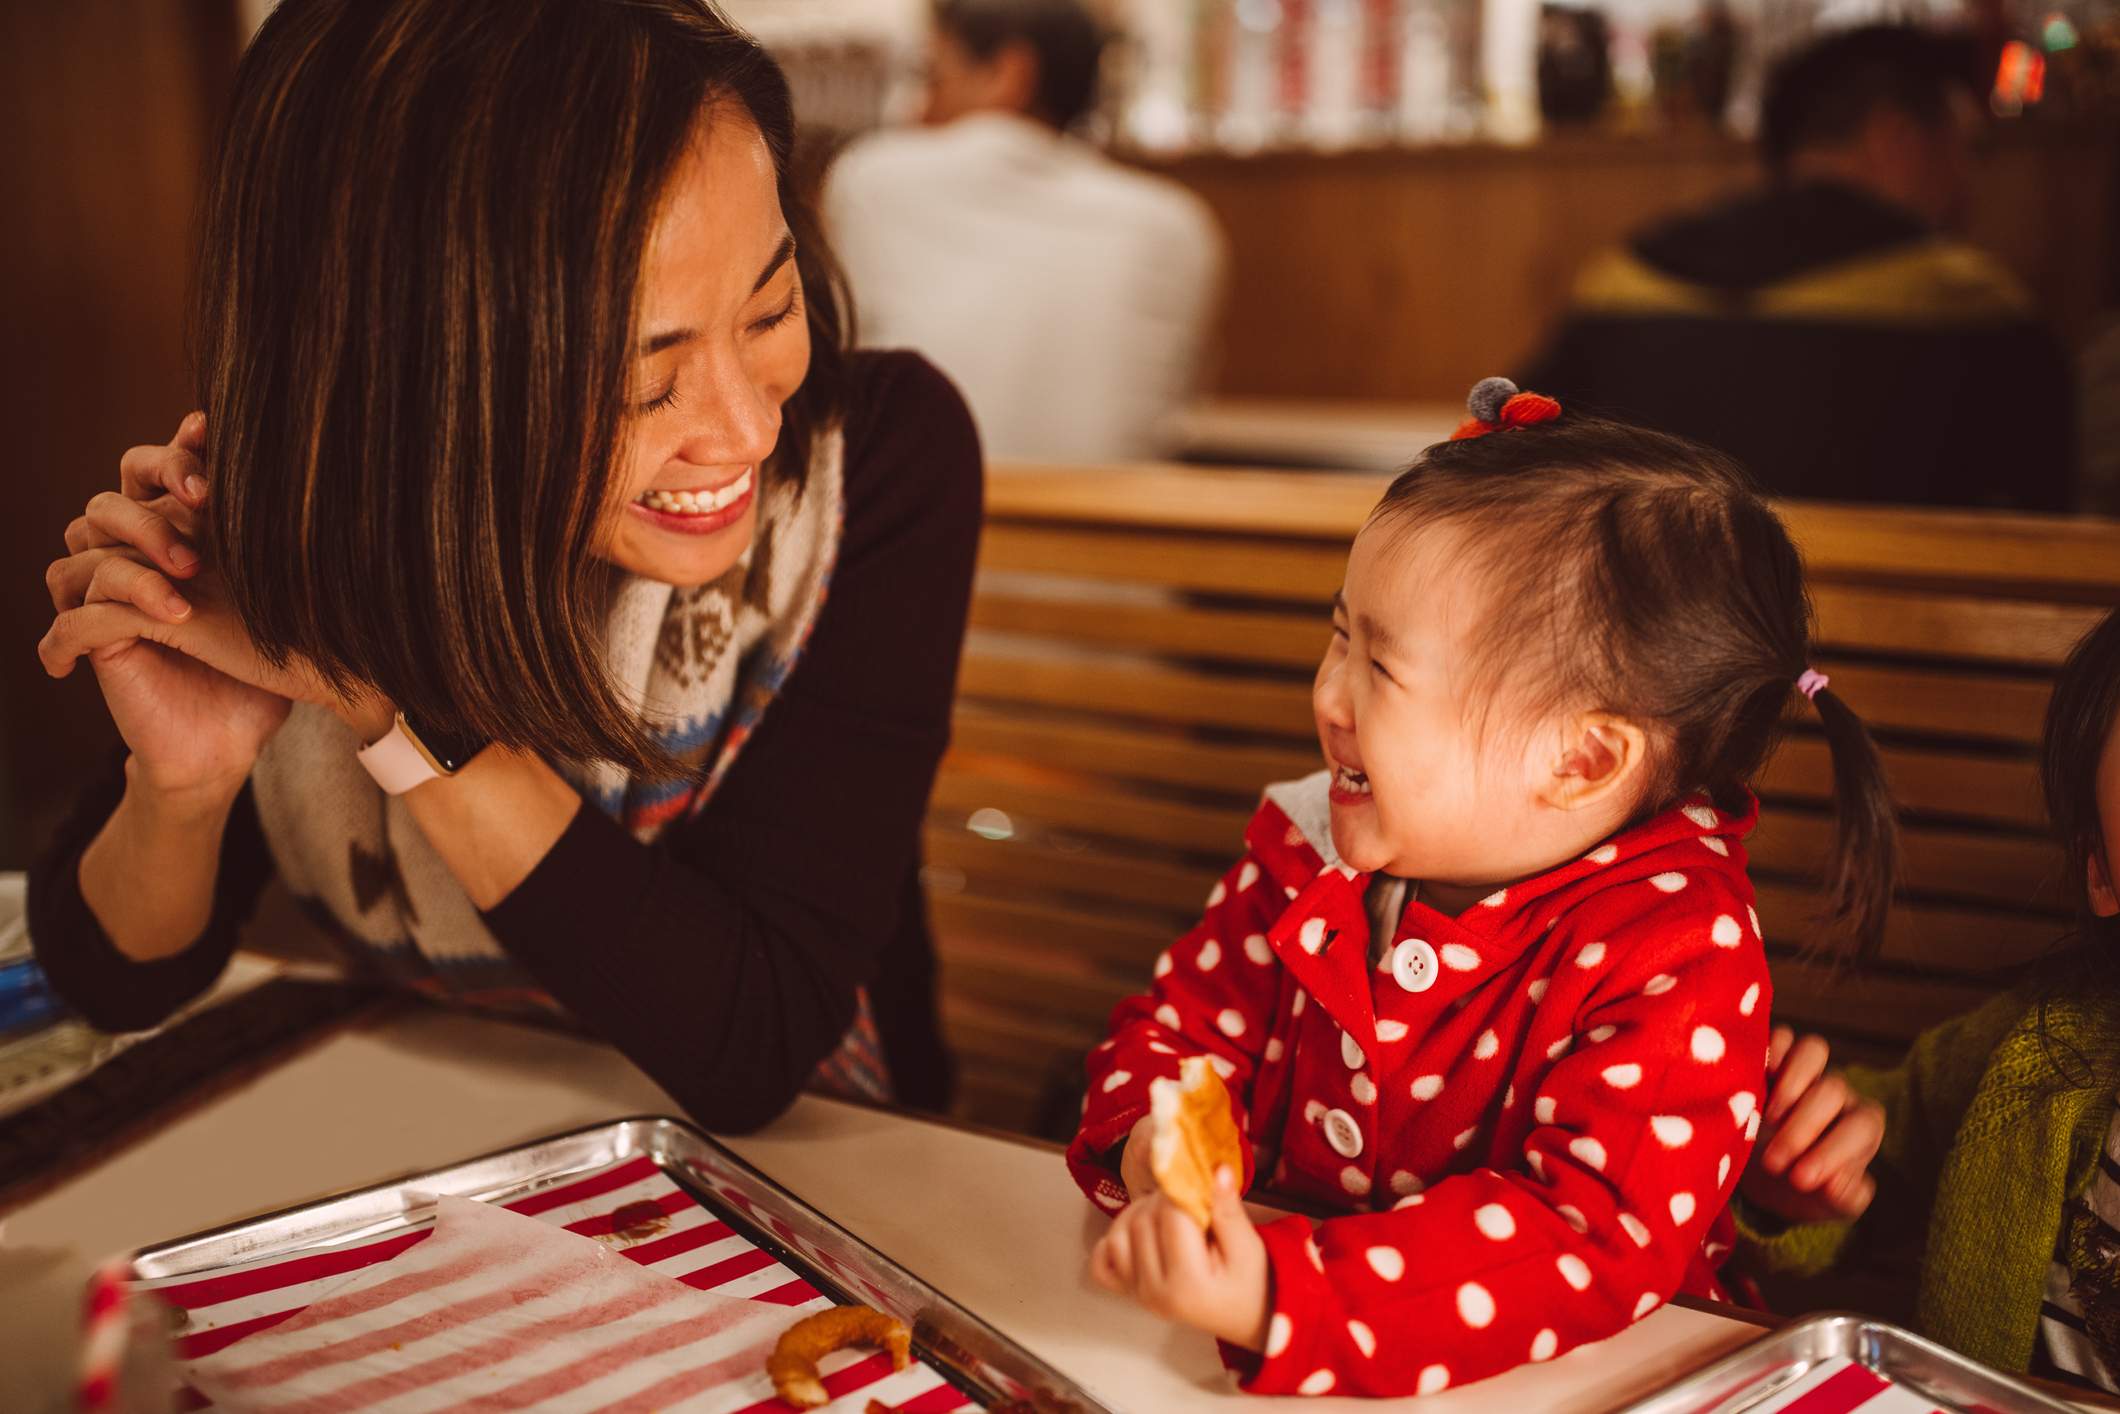 Image depicts a small child in a red polkadot jacket eating some bread and smiling at their parent. Their parent sits in the booth next to them and is smiling back. 